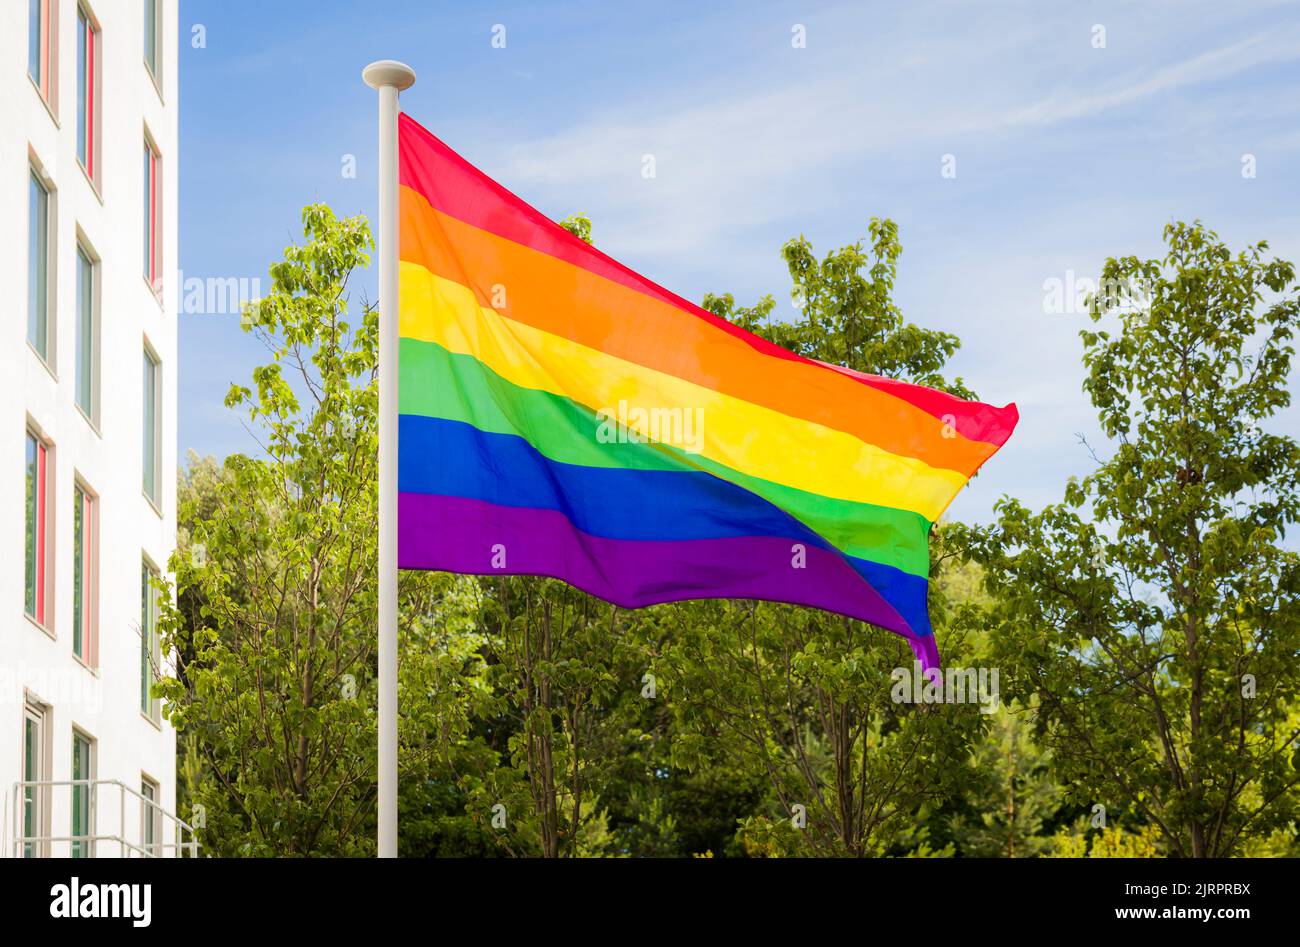 Gay pride flag (rainbow flag), a symbol of LBGT diversity, flying on a flagpole in Bournemouth, UK Stock Photo